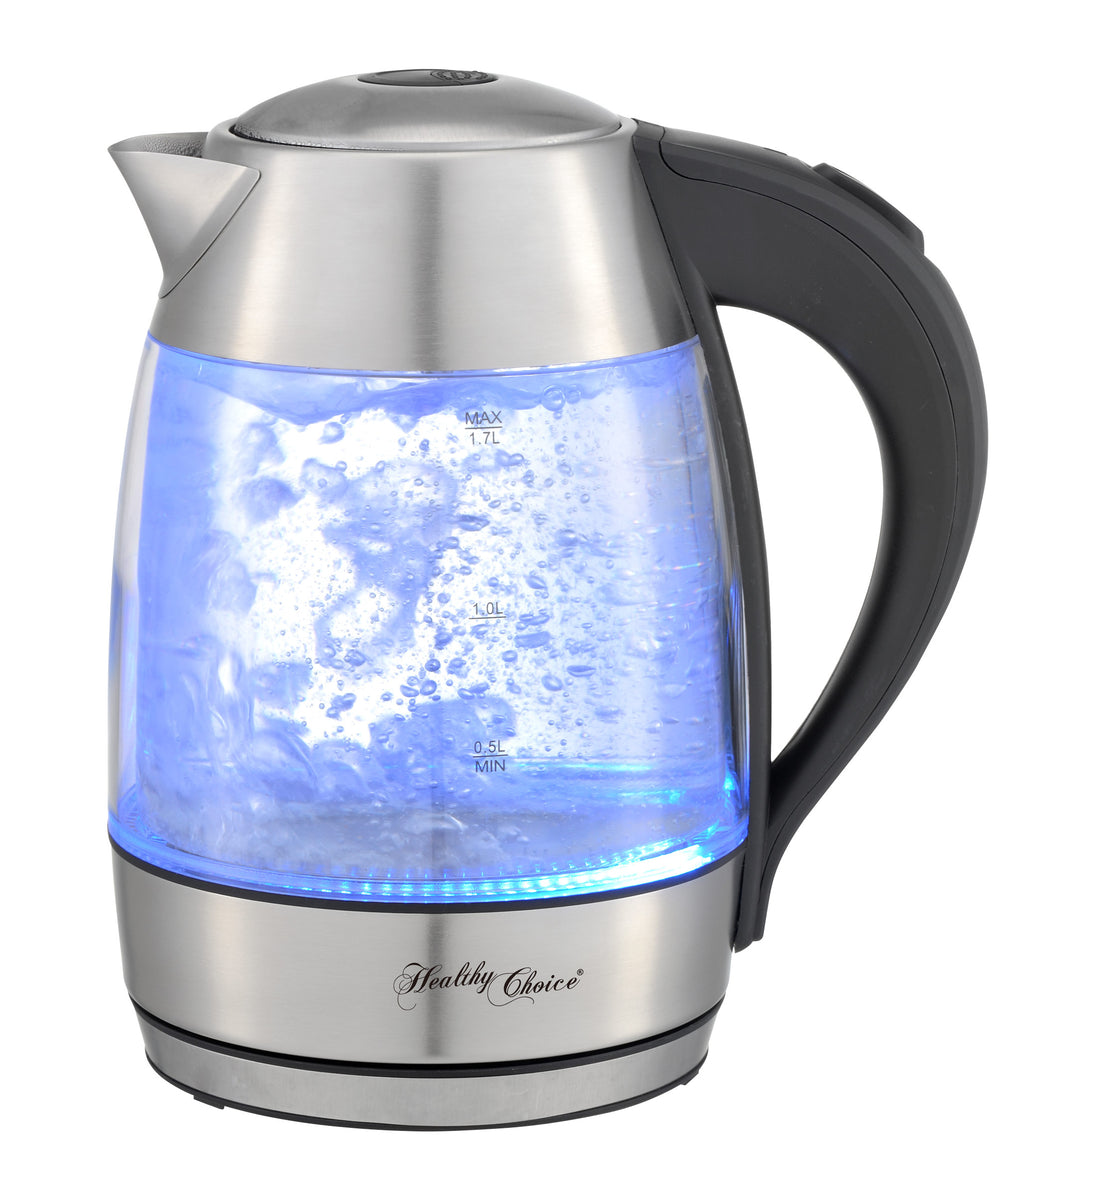 Blue LED illumination in the 1.7L glass kettle.